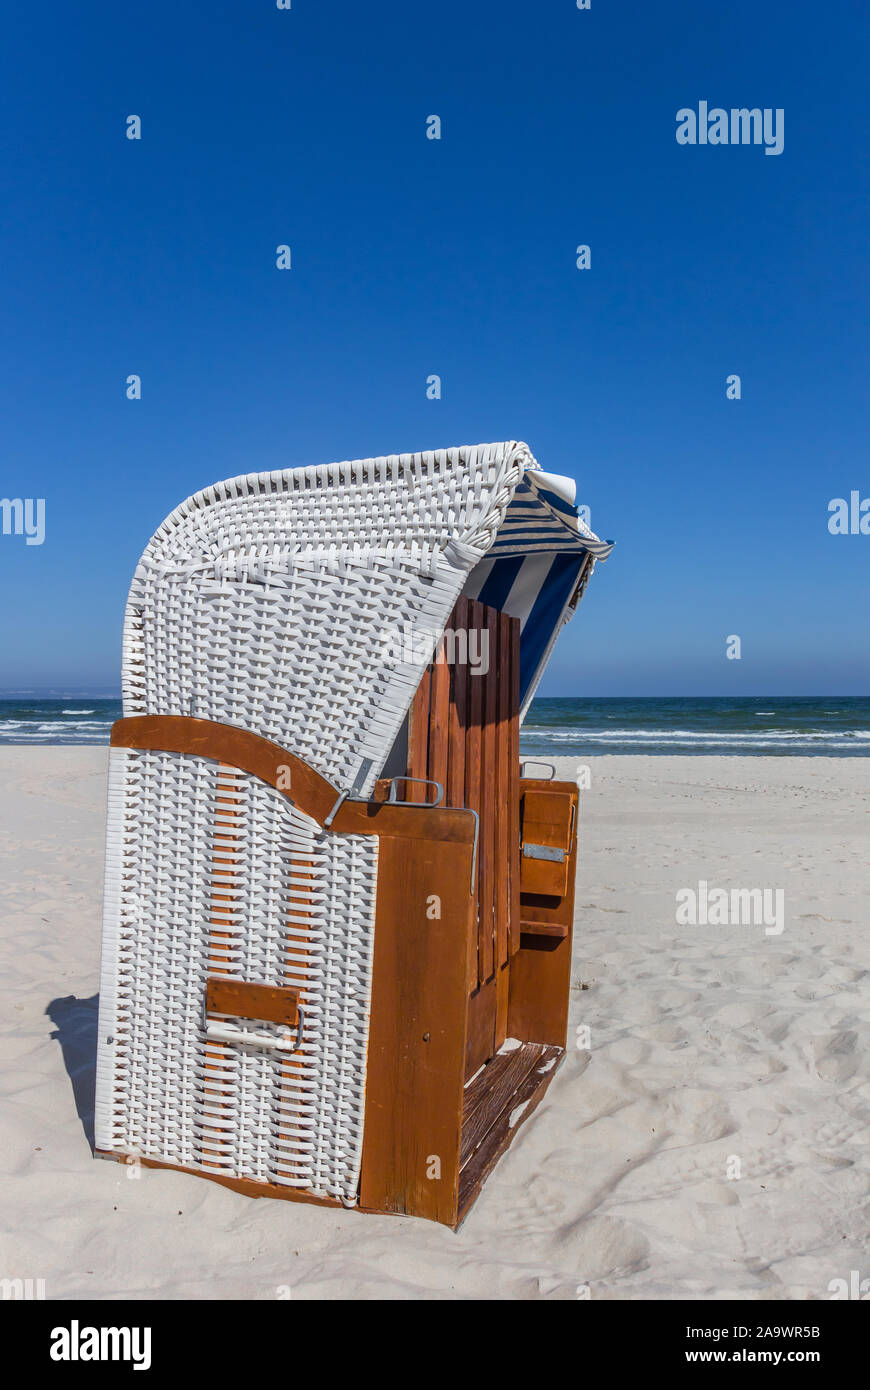 Traditional Strandkorb beach chair on Rugen island, Germany Stock Photo